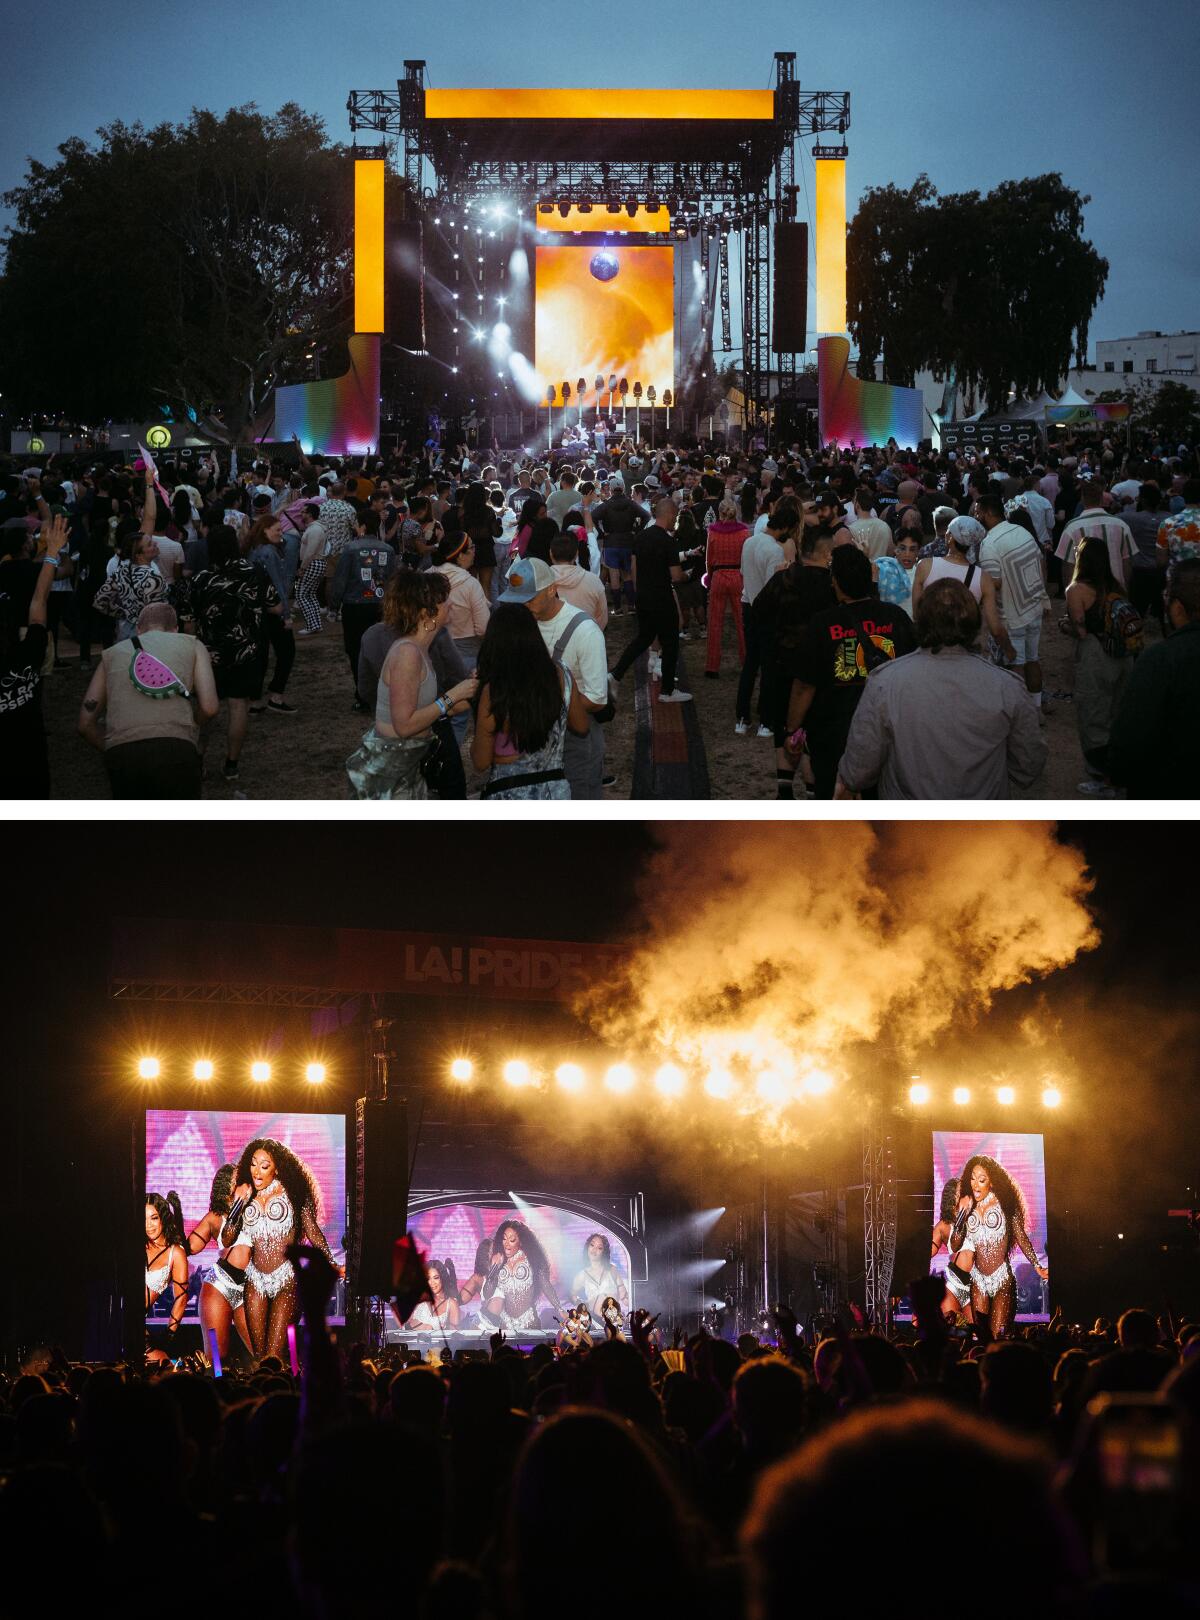 Two photos: One is the stage at Weho Pride, the other is of the stage at LA Pride in the Park.